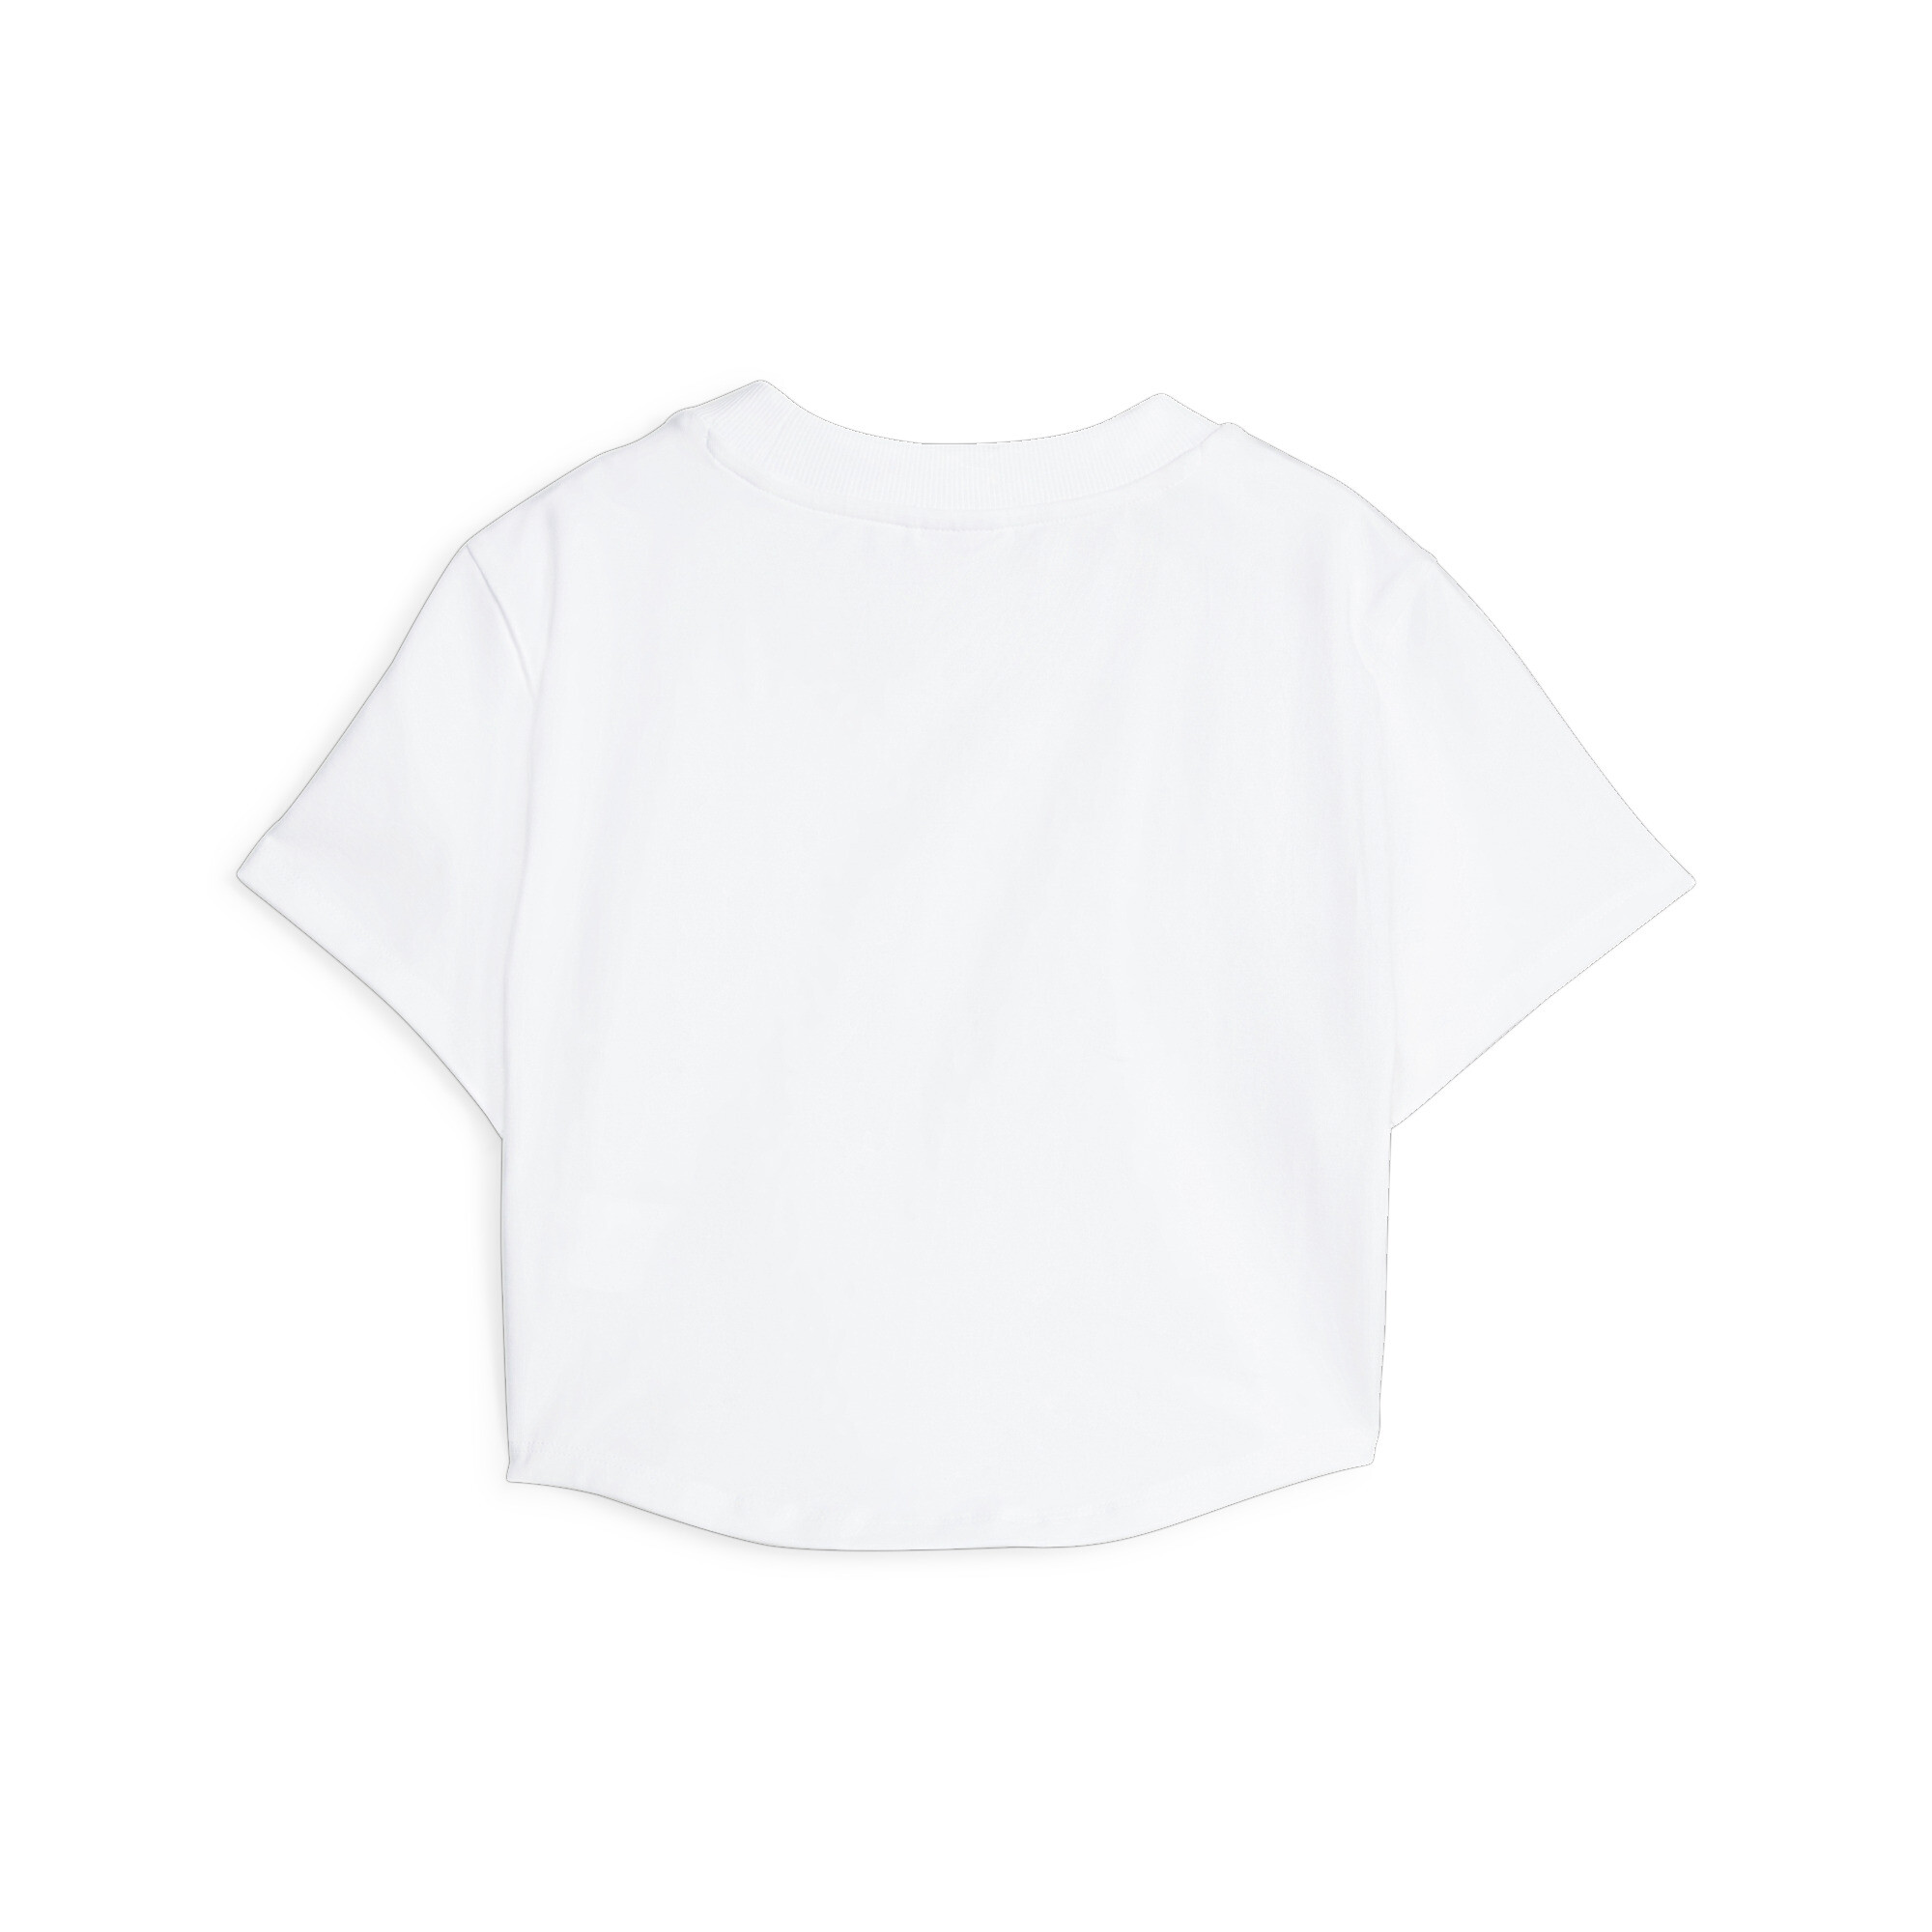 Women's PUMA DARE TO Cropped T-Shirt In White, Size XL